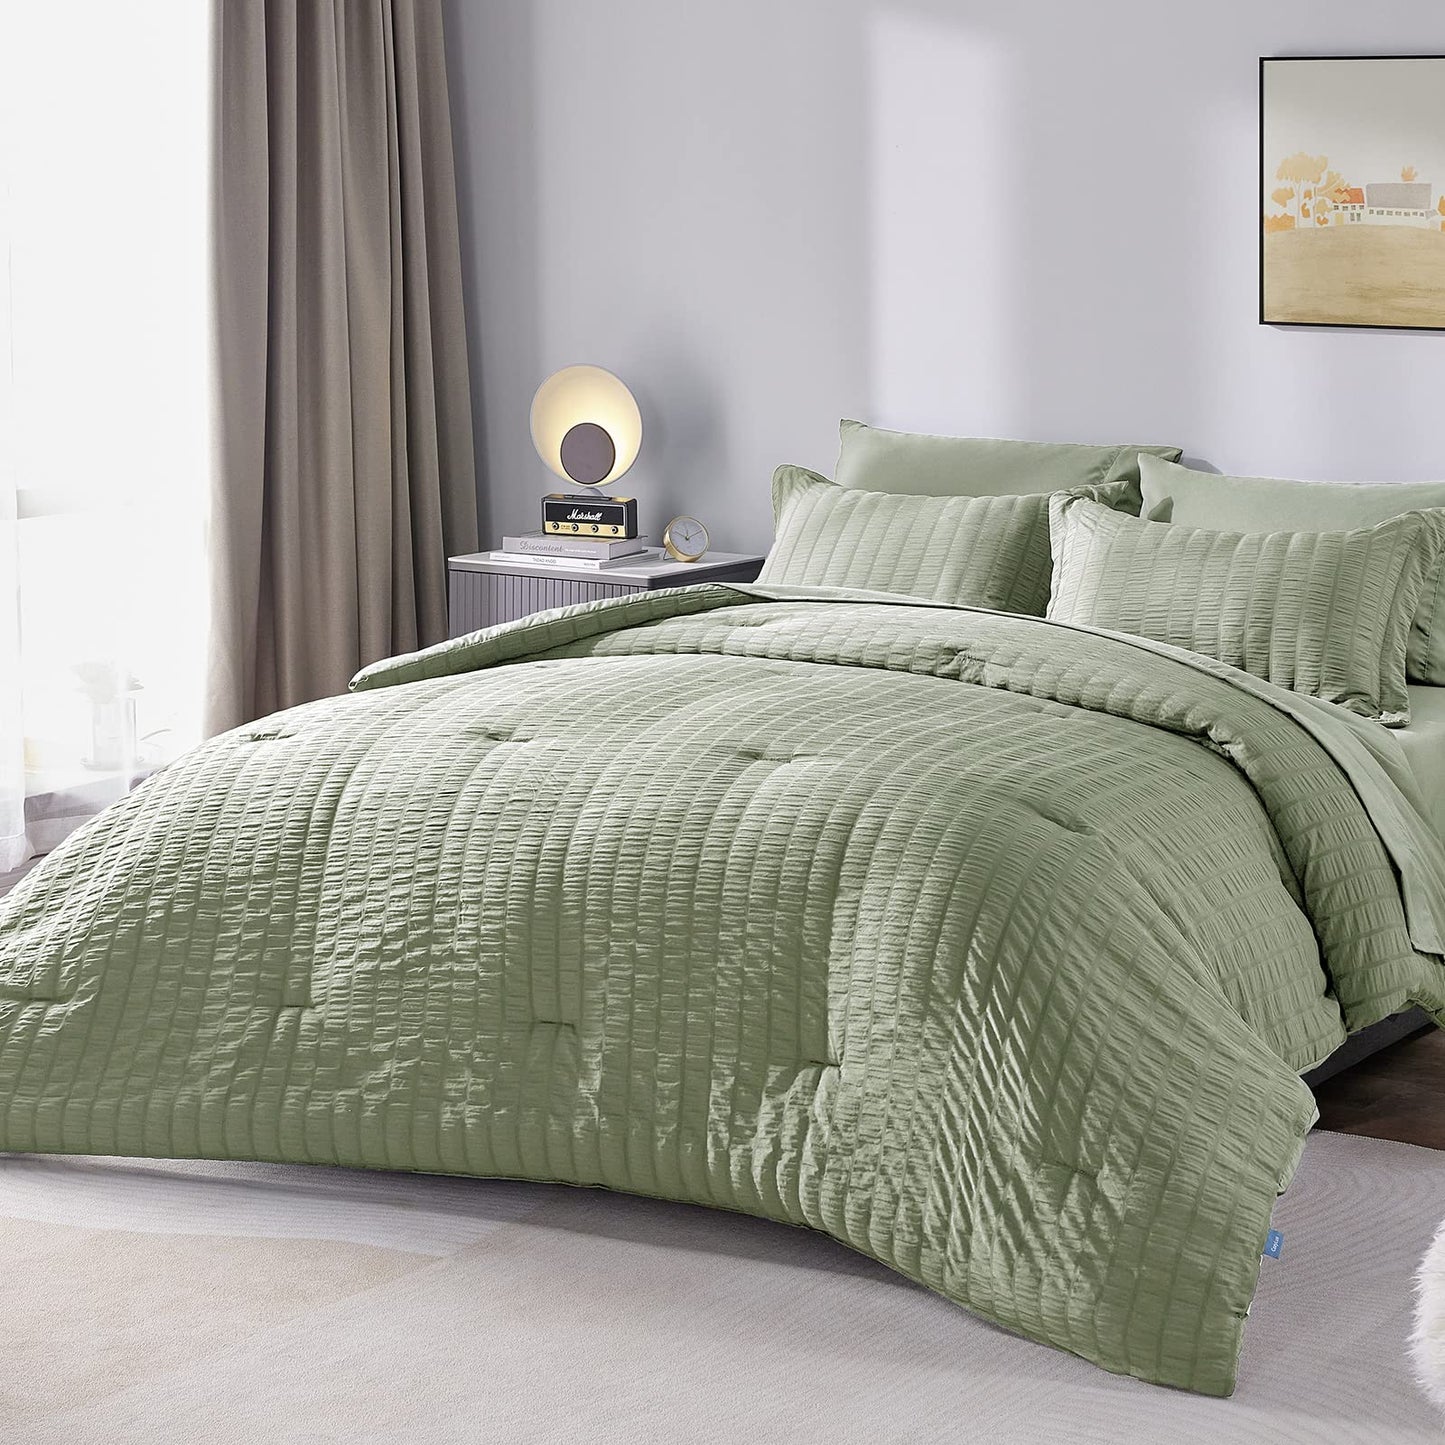 CozyLux Twin Bed in a Bag Sage Green Seersucker Textured Comforter Set with Sheets 5-Pieces for Girls and Boys - Bedding Sets with Comforter, Pillow Sham, Flat Sheet, Fitted Sheet, Pillowcase